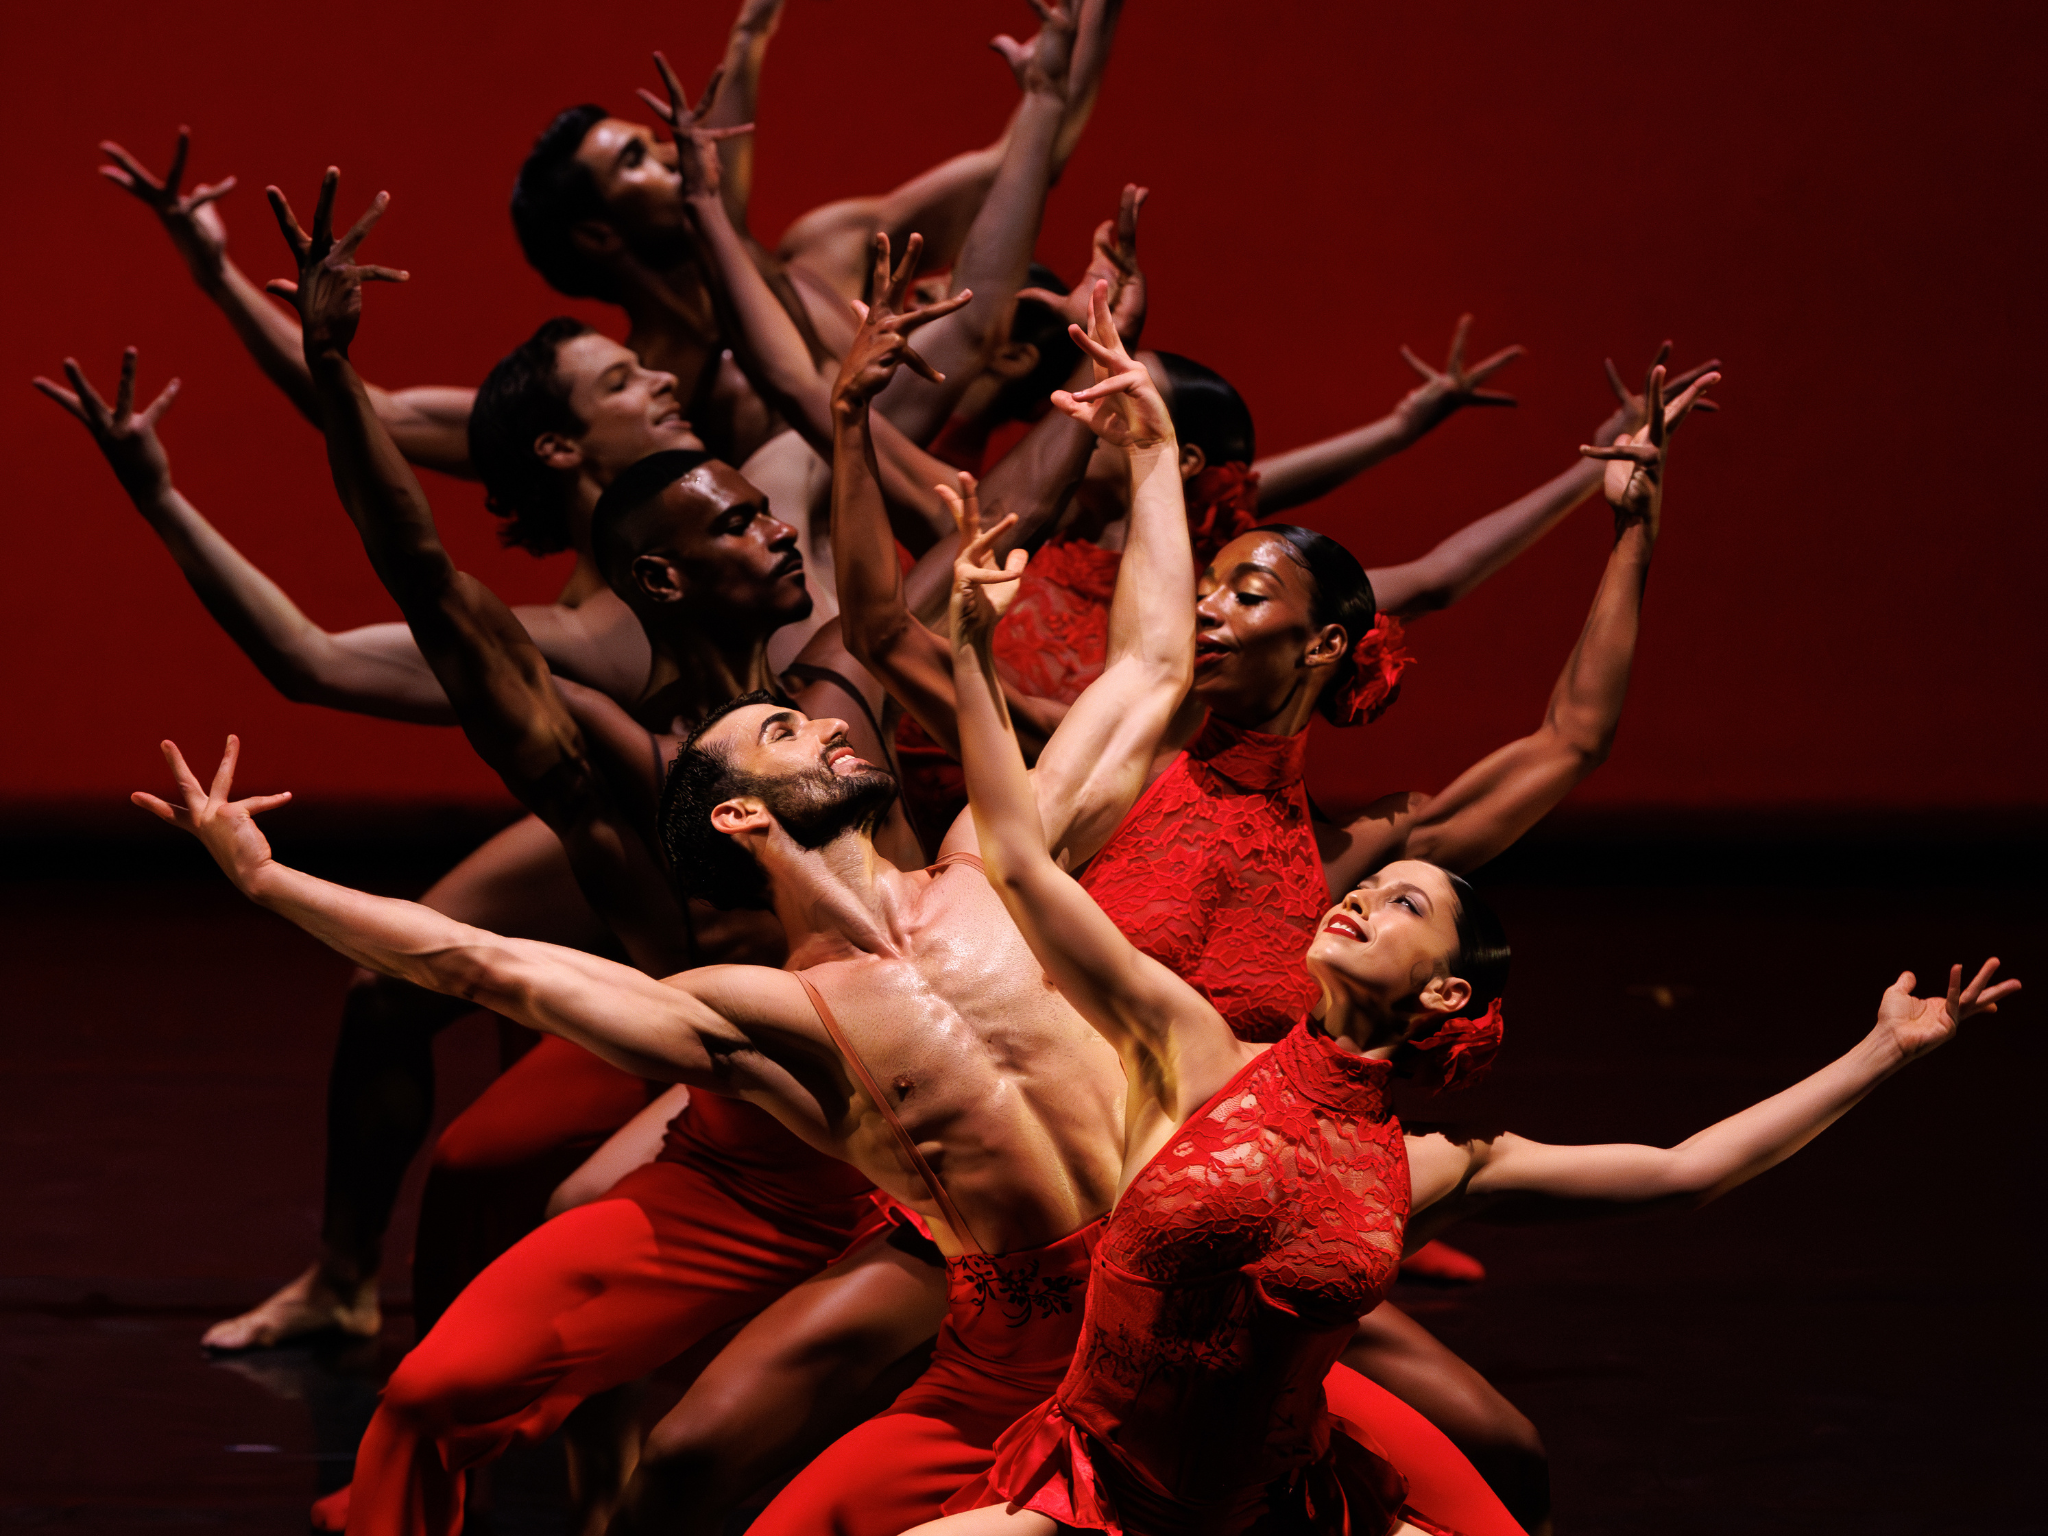 Ballet Hispánico: An Inclusive Cultural Performance in New London